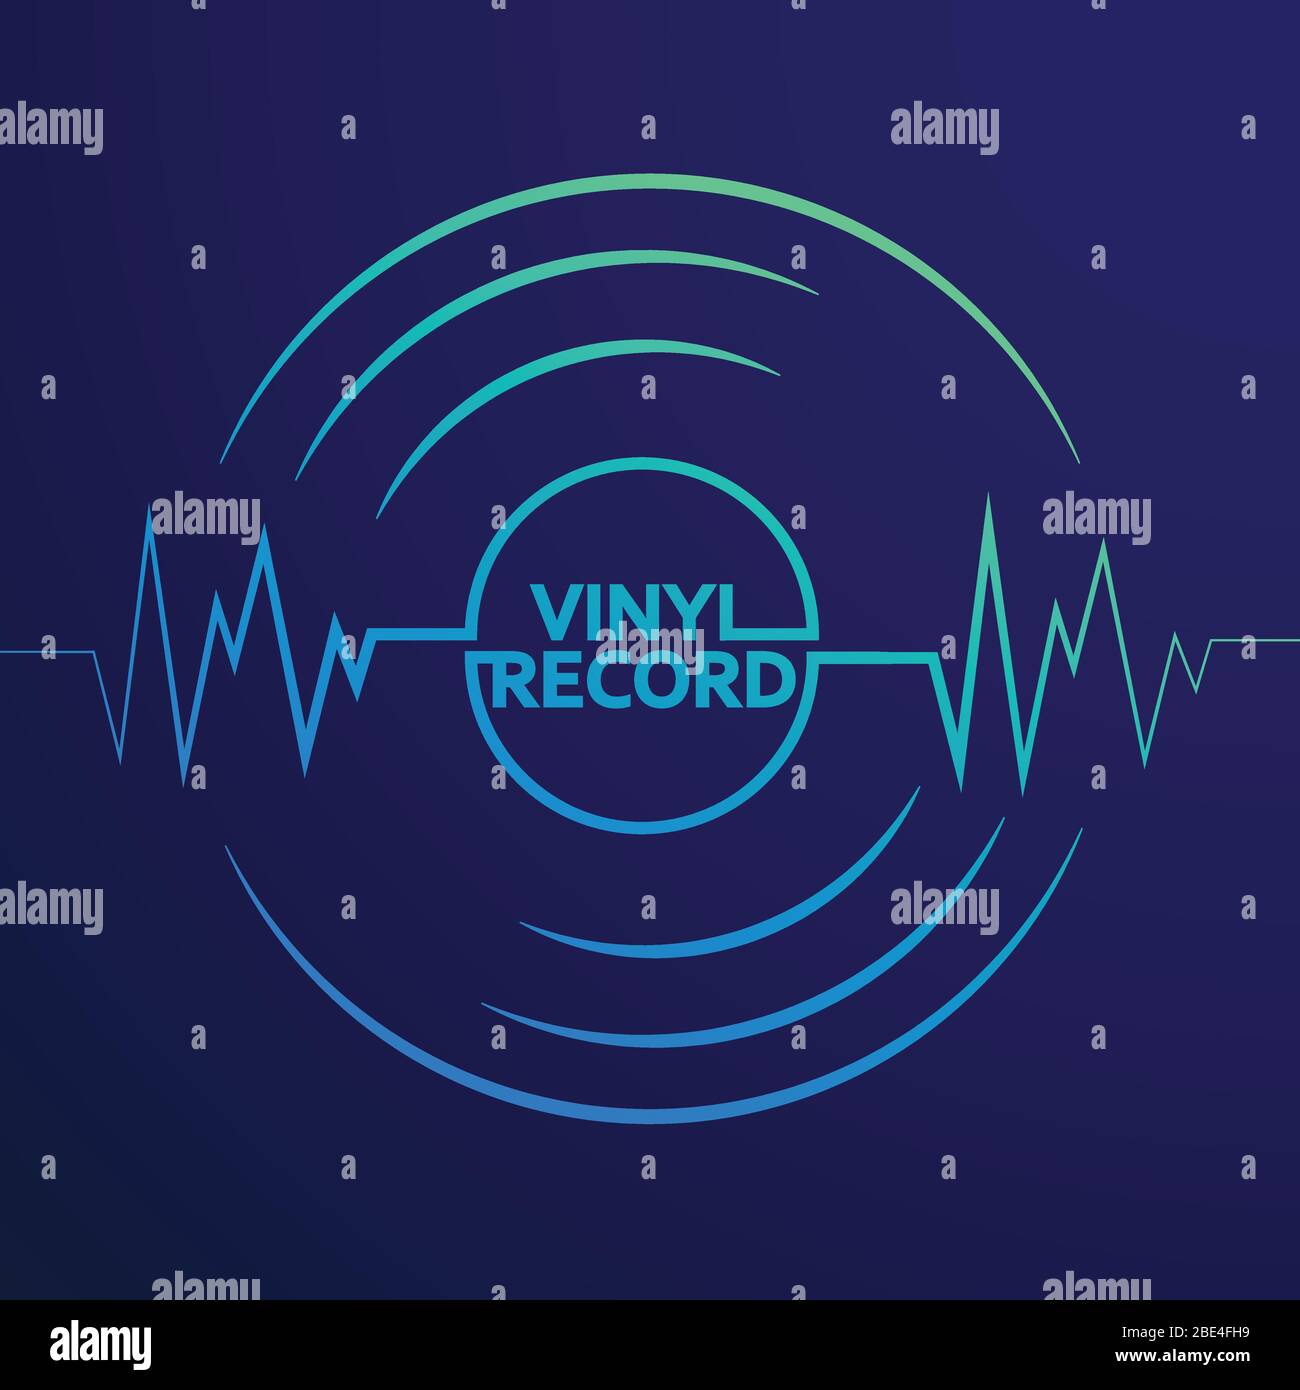 Abstract vinyl record wave music vector with blue background graphic Stock Vector